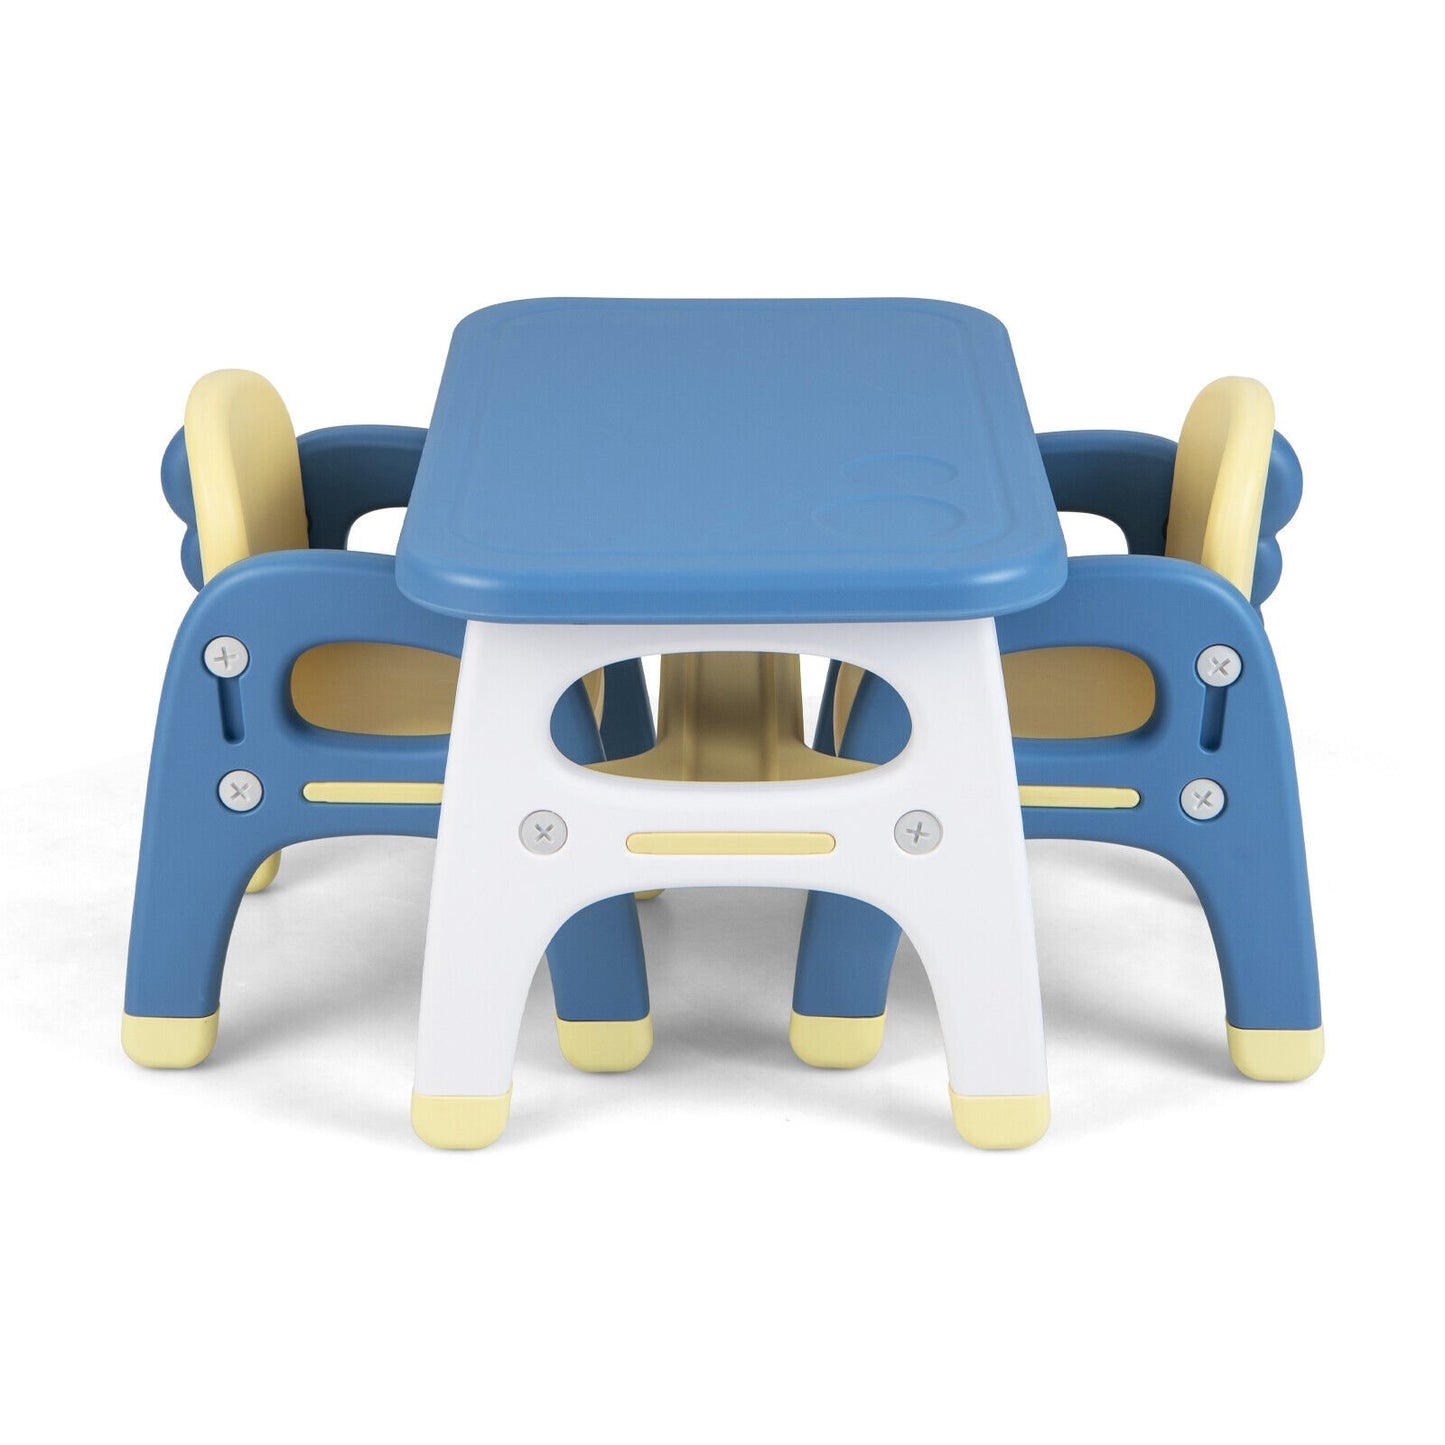 Kids Table and 2 Chairs Set with Storage Shelf and Building Blocks, Blue